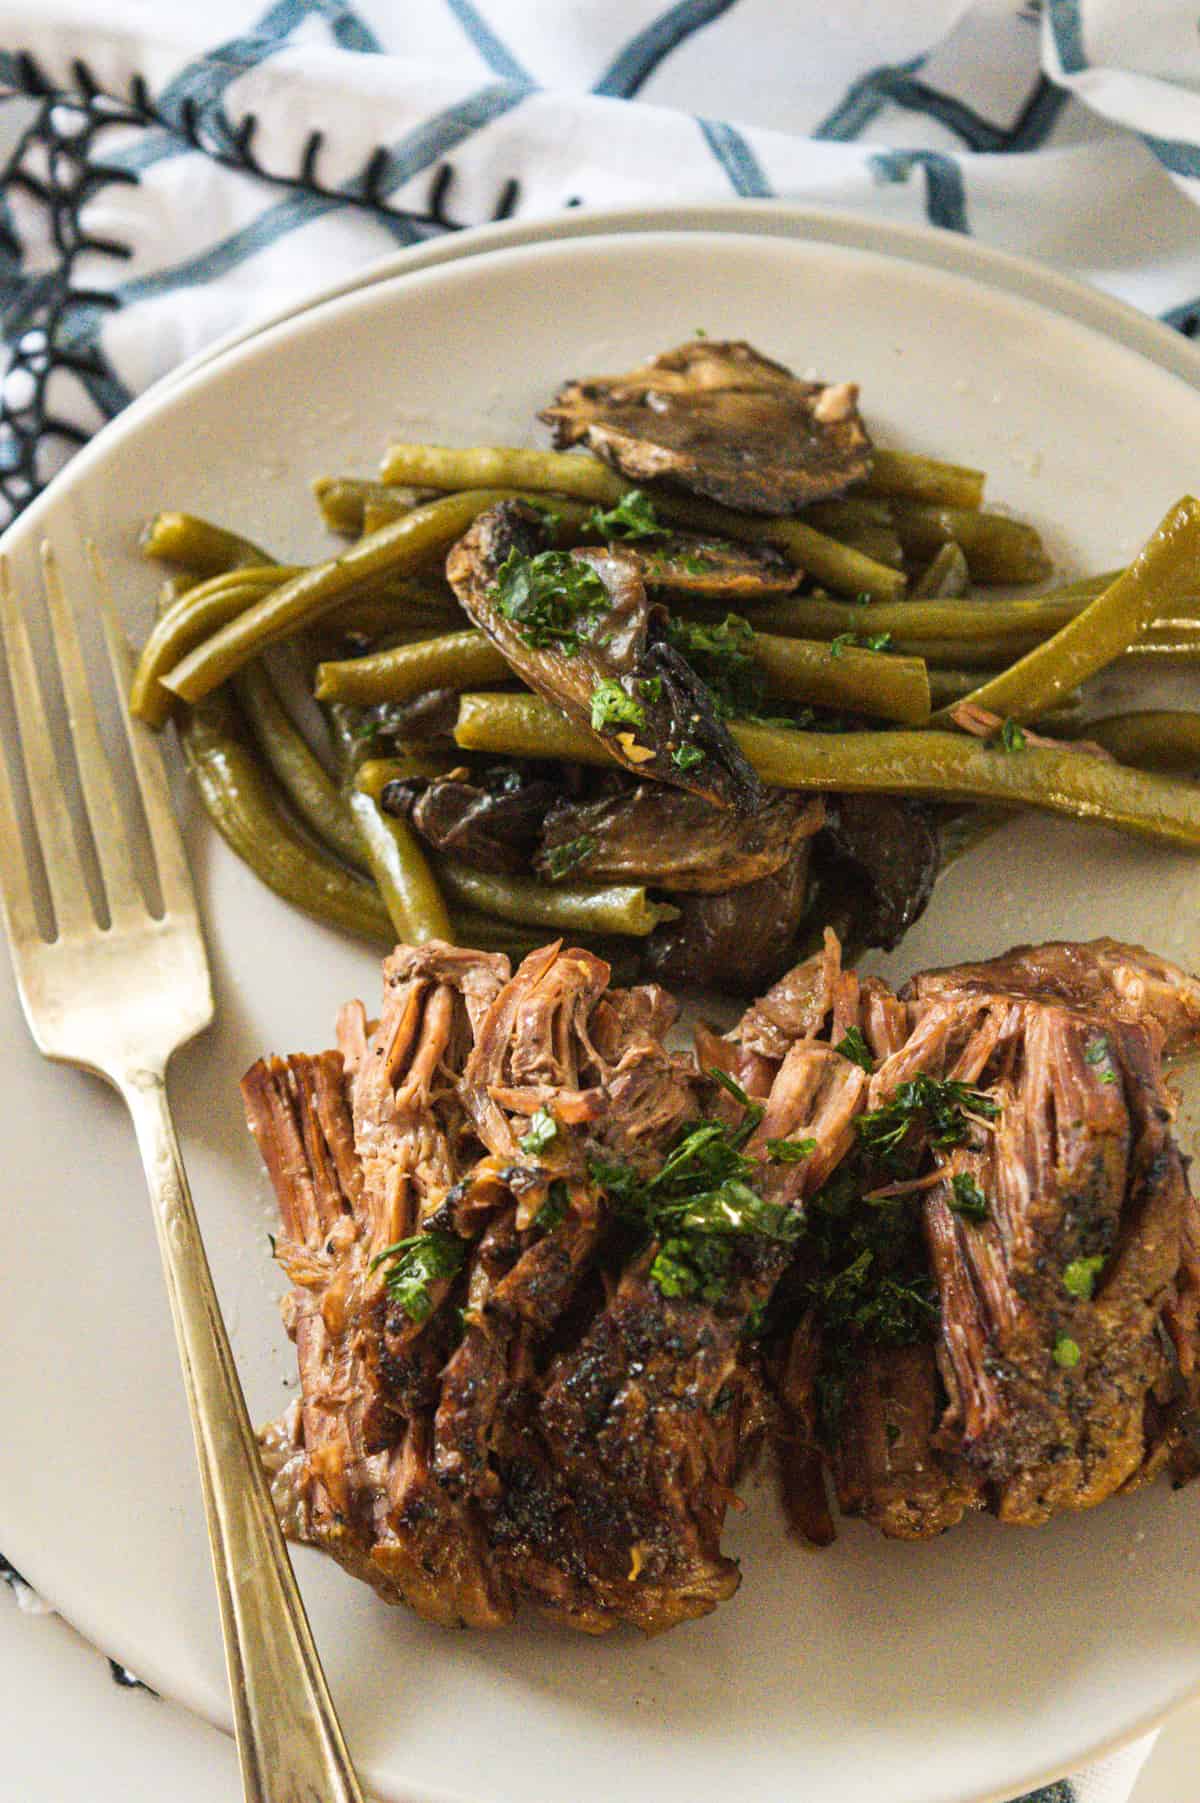 Pot roast with green beans and mushrooms served on an off-white plate.